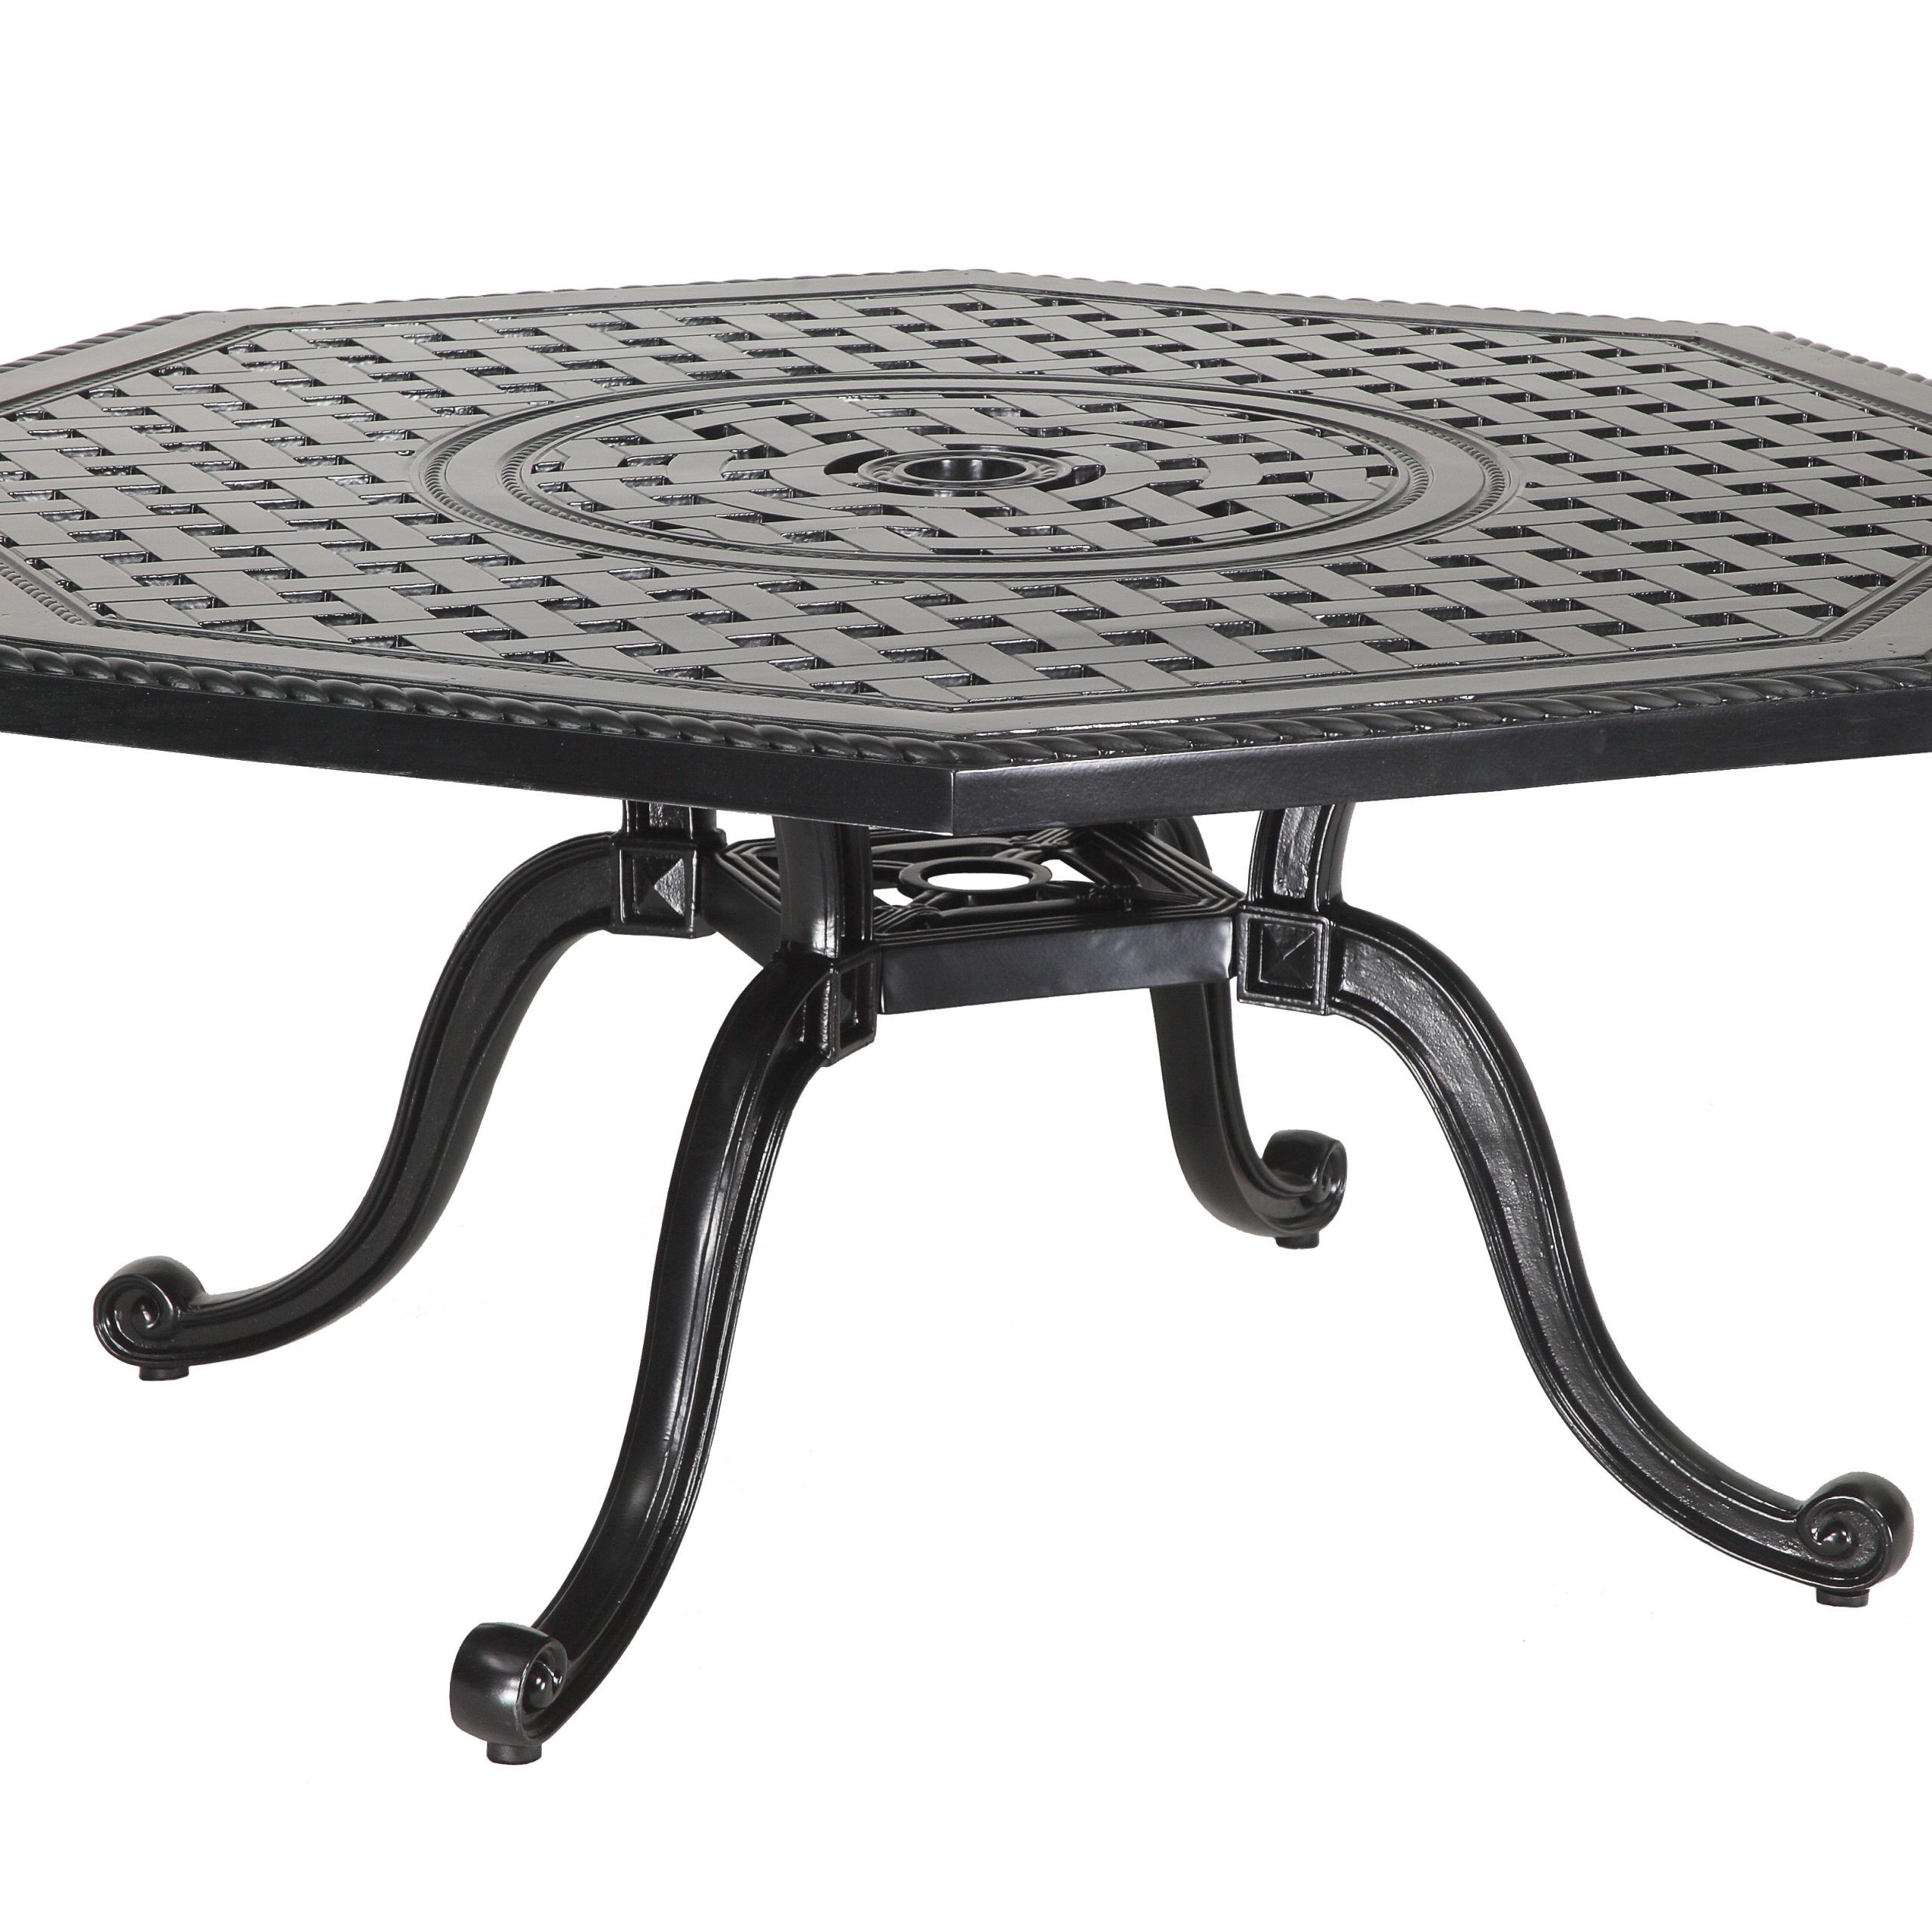 Popular Gensun Grand Terrace Cast Aluminum 45'' Wide Octagon Chat Intended For Octagon Console Tables (View 9 of 10)